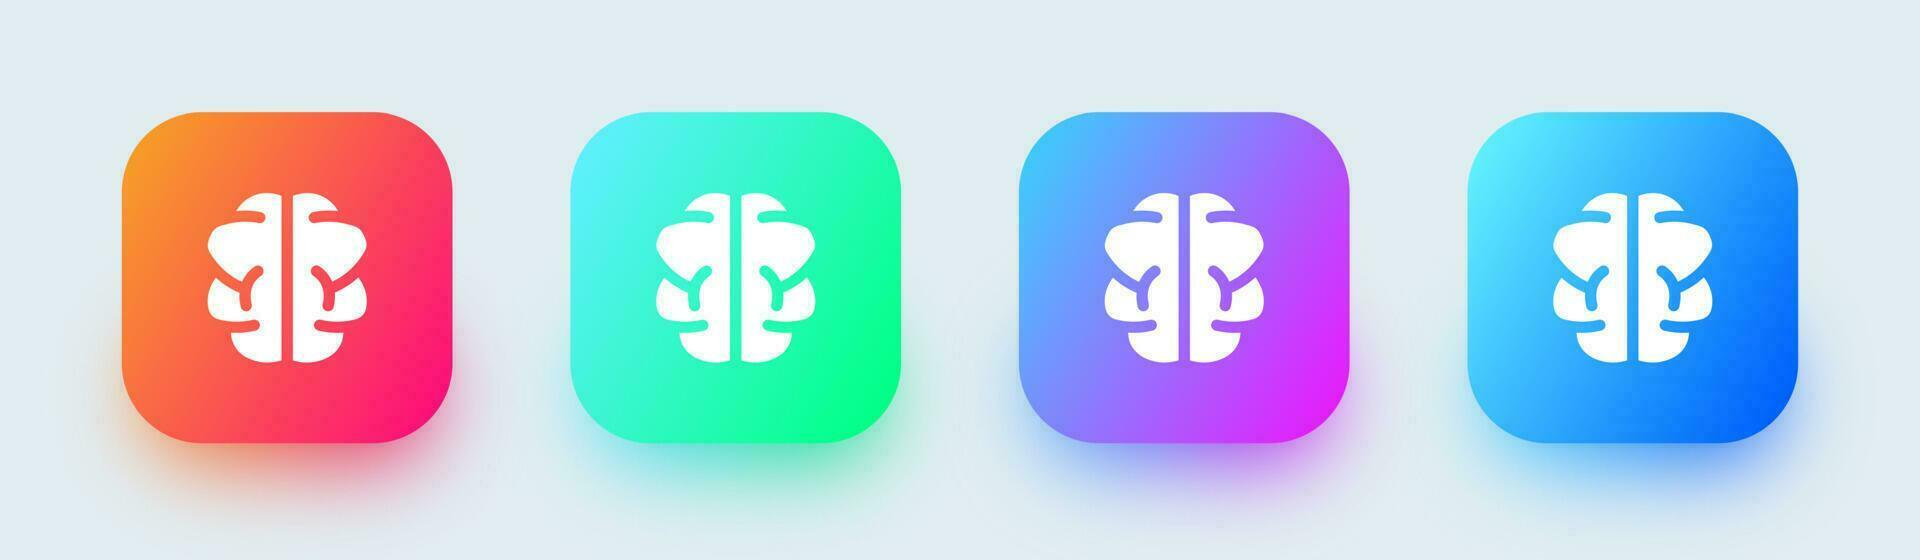 Brain solid icon in square gradient colors. Mind signs vector illustration.